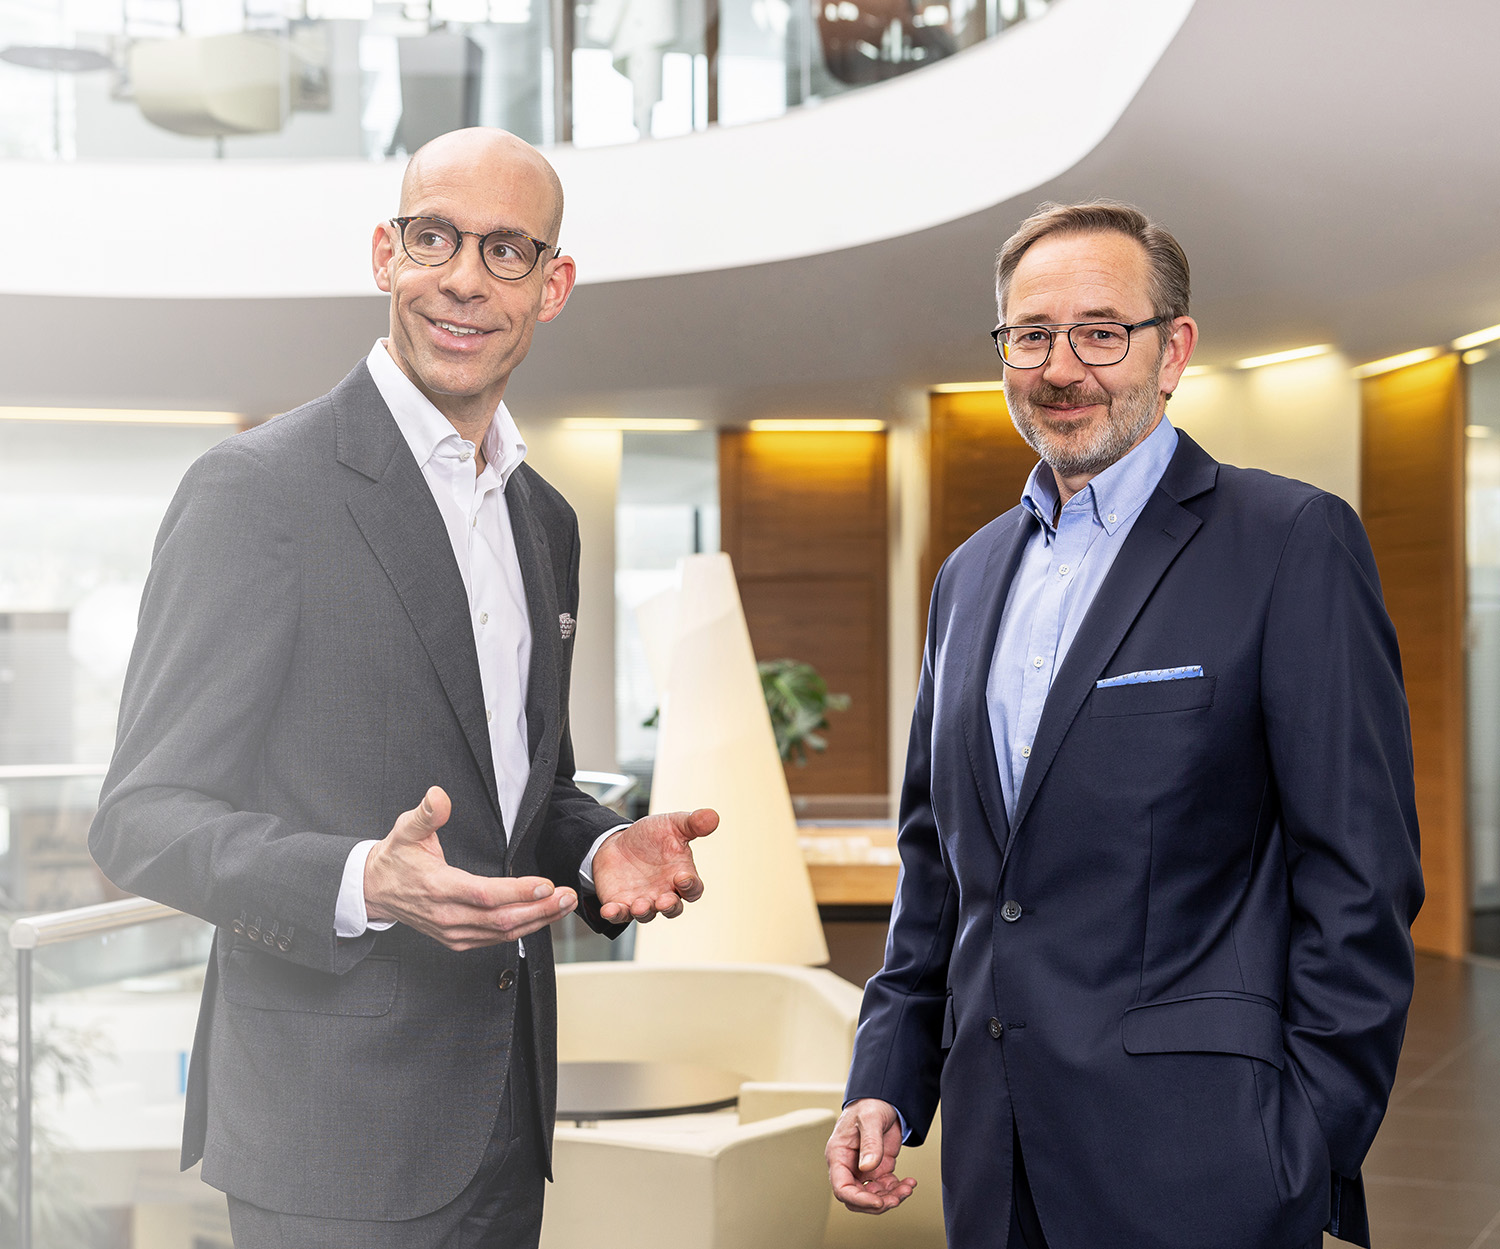 CEO Axel Kühner and CFO Hannes Moser talking to each other (photo)